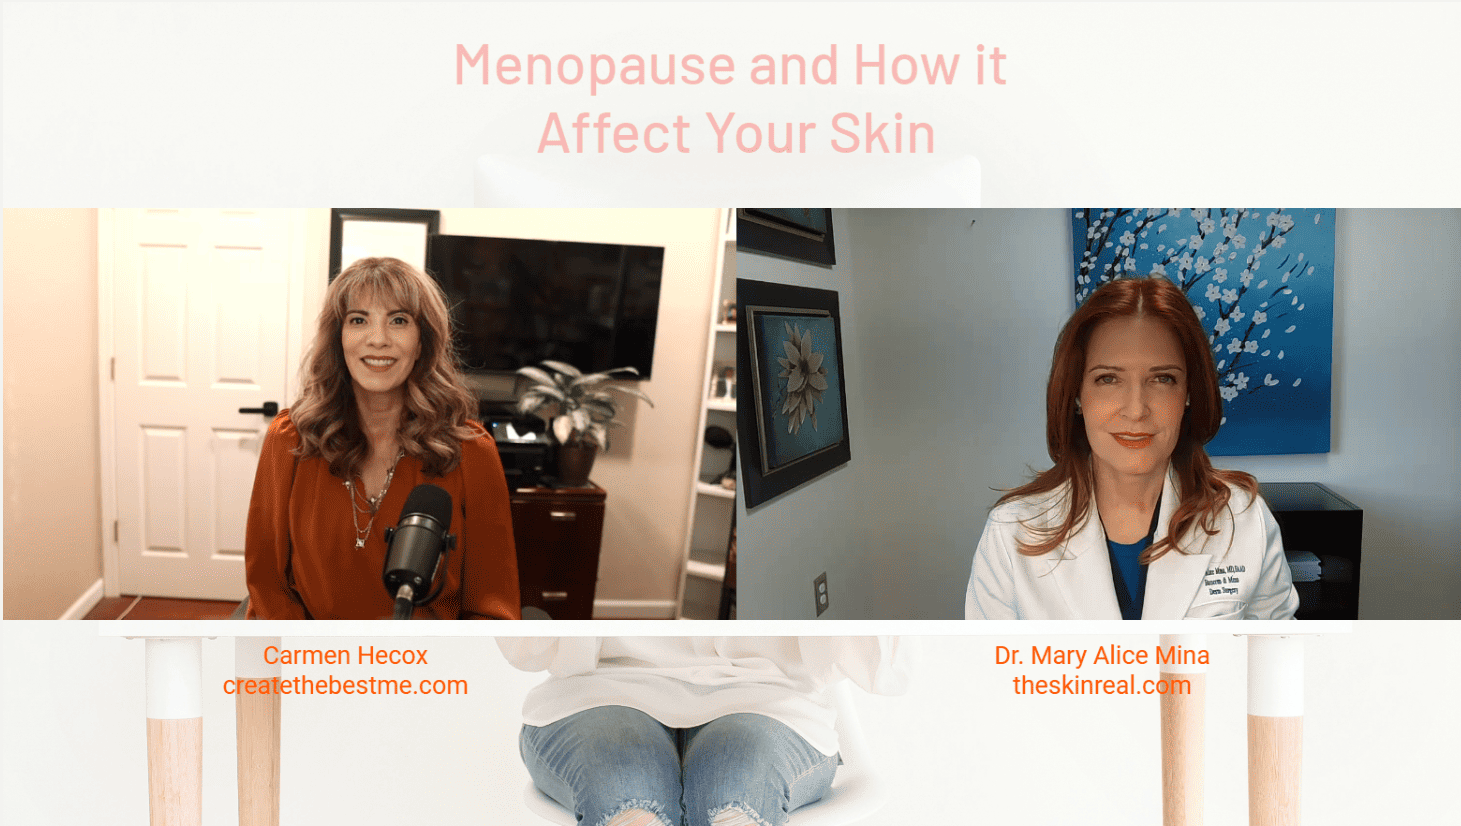 Carmen Hecox and Dr. Mary Alice Mina YouTube interview on menopause and its effects on skin health.